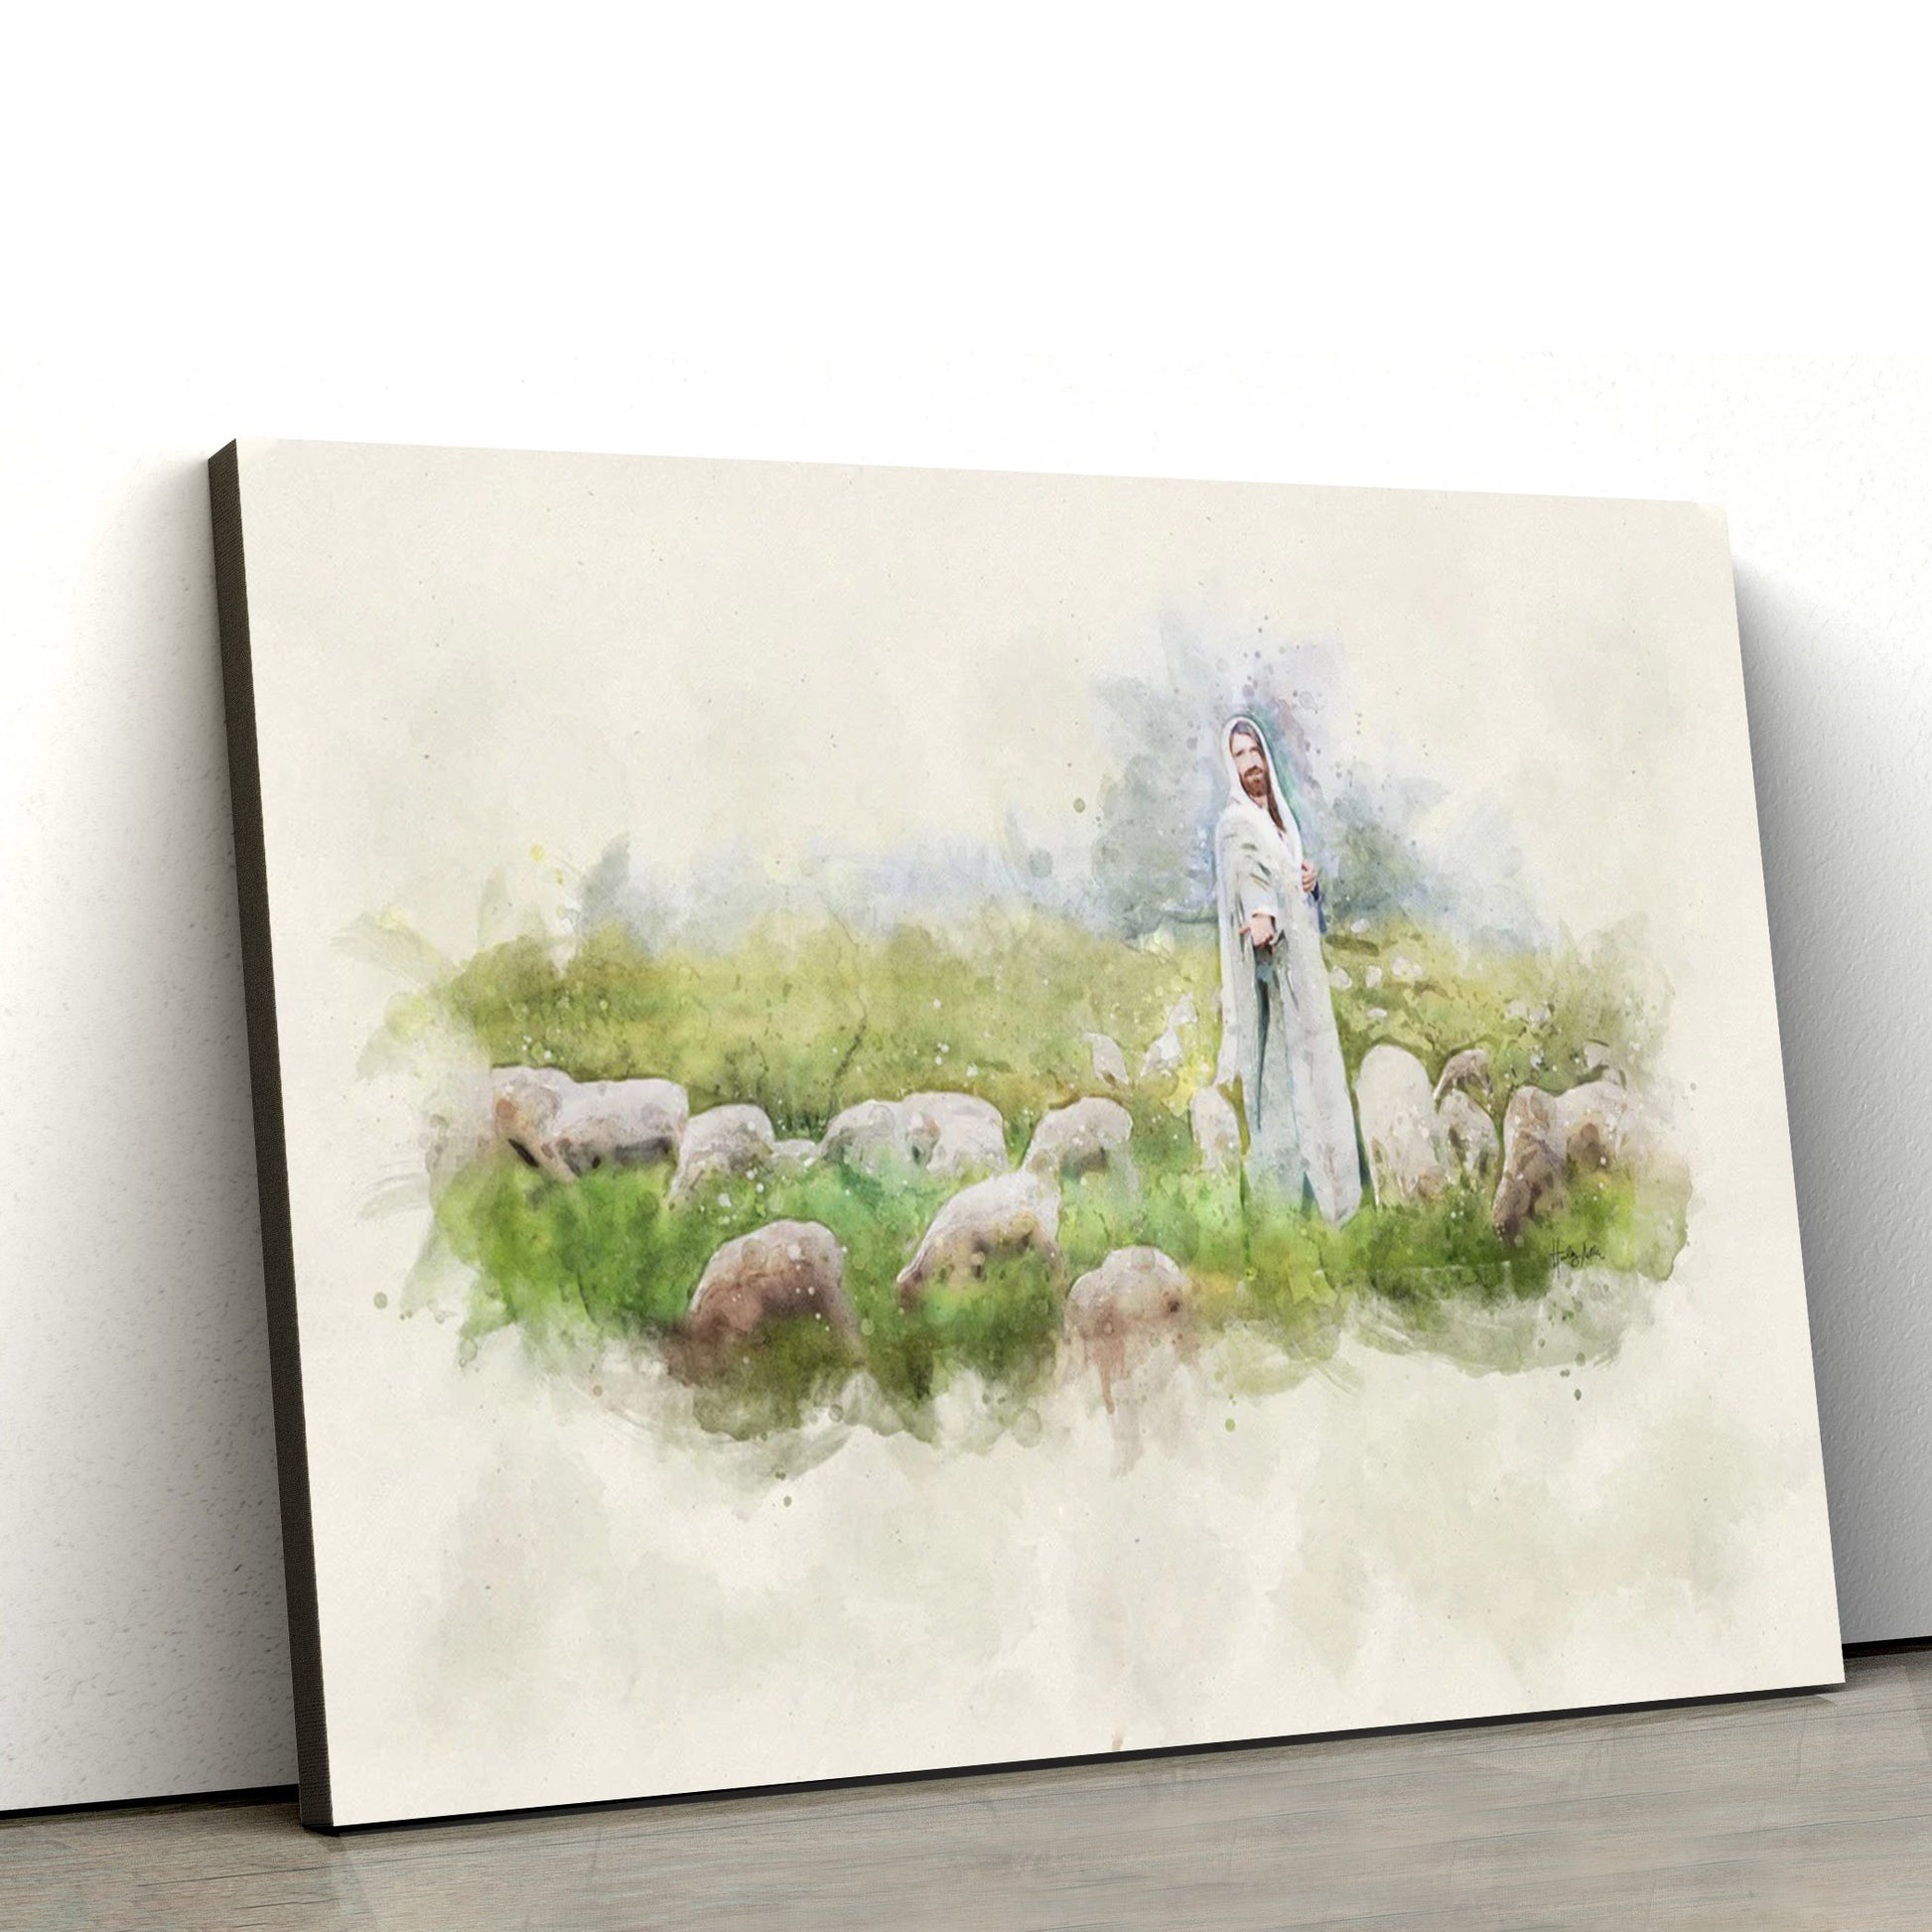 Jesus Stands Among Sheep Canvas Art - Jesus Christ Pictures - Jesus Wall Art - Christian Wall Decor